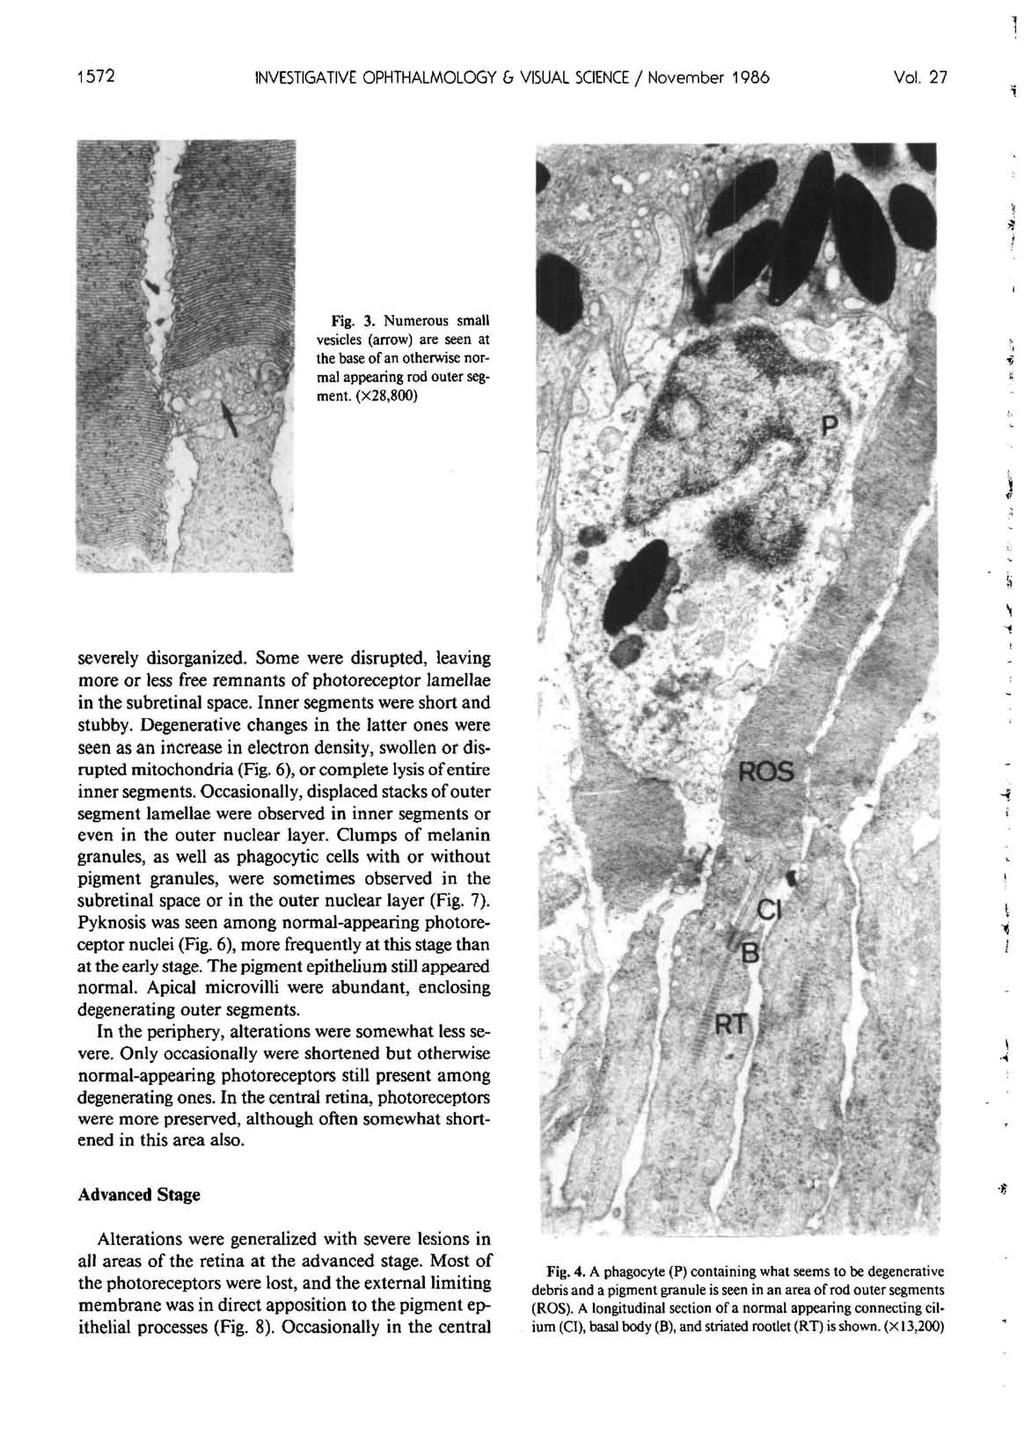 1572 INVESTIGATIVE OPHTHALMOLOGY & VISUAL SCIENCE / November 1986 Vol. 27 Fig. 3. Numerous small vesicles (arrow) are seen at the base of an otherwise normal appearing rod outer segment.